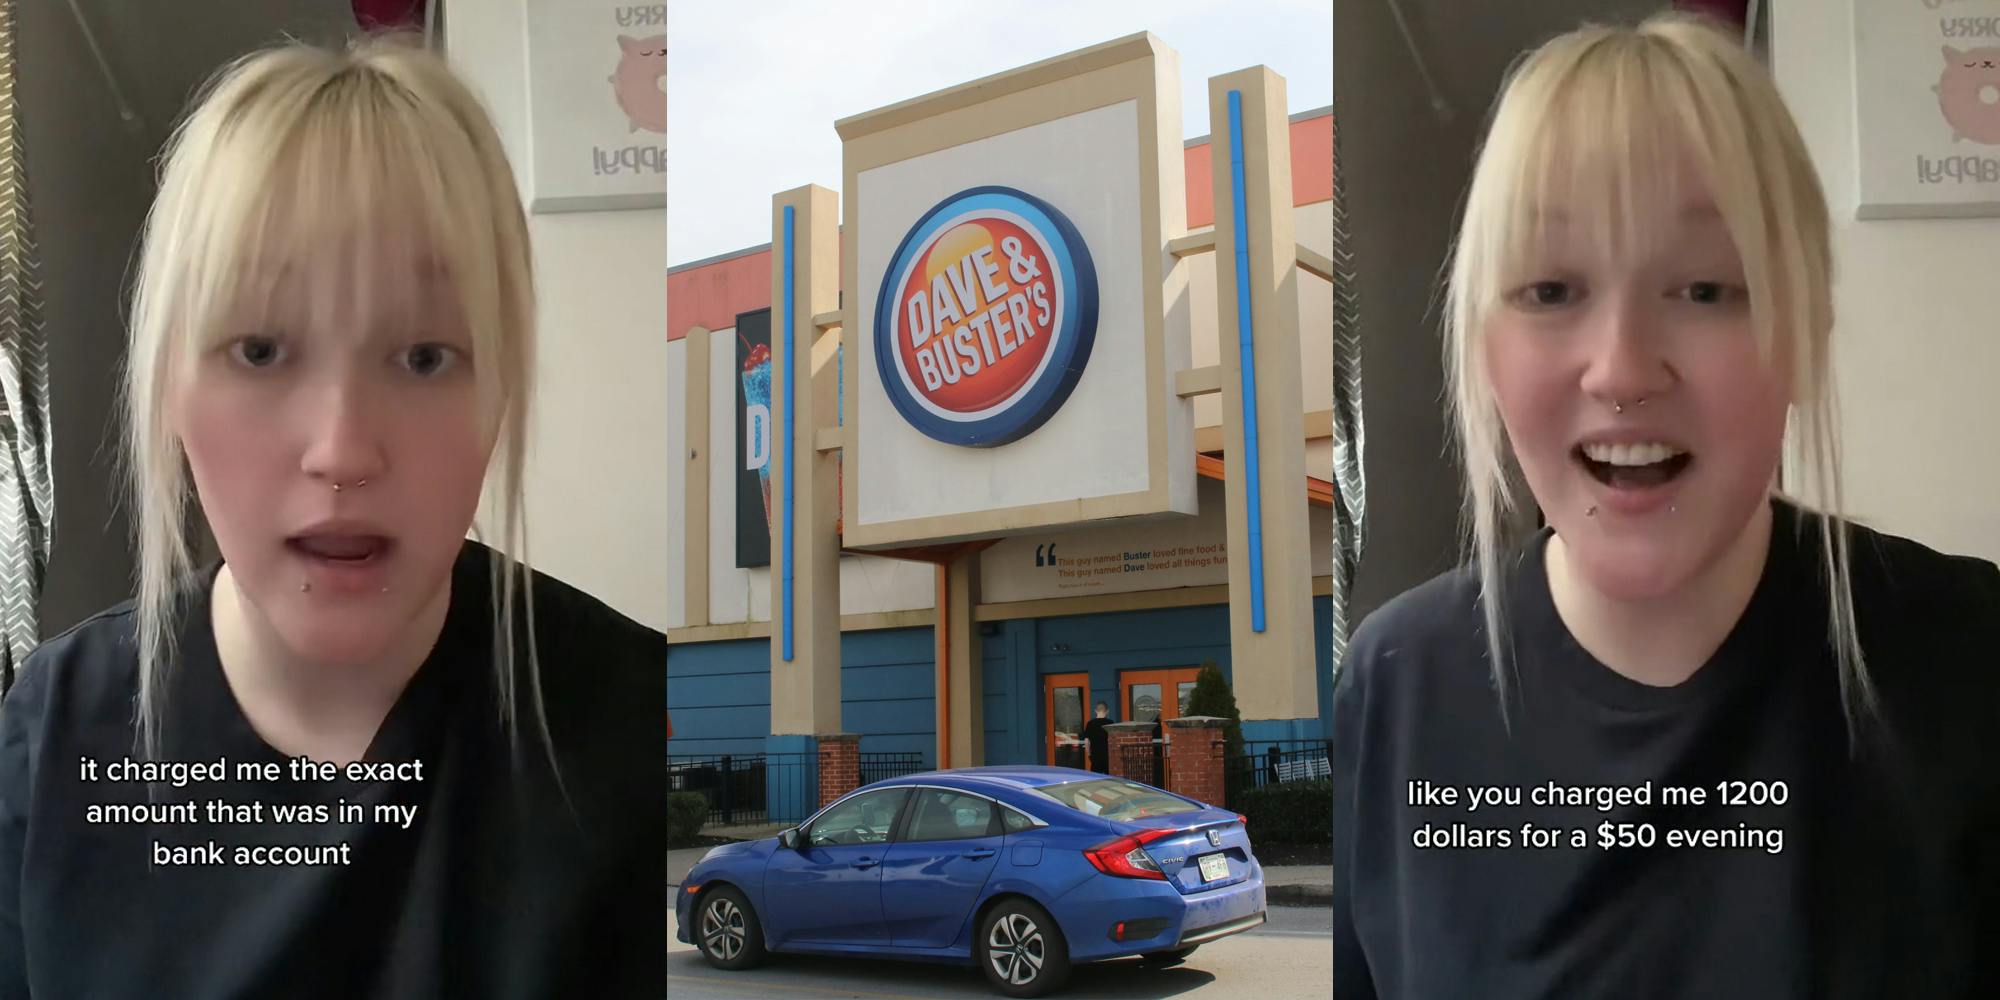 Dave and Buster's customer speaking with caption "it charged me the exact amount that was in my bank account" (l) Dave and Buster's building entrance with sign (c) Dave and Buster's customer speaking with caption "like you charged me 1200 dollars for a $50 evening" (r)